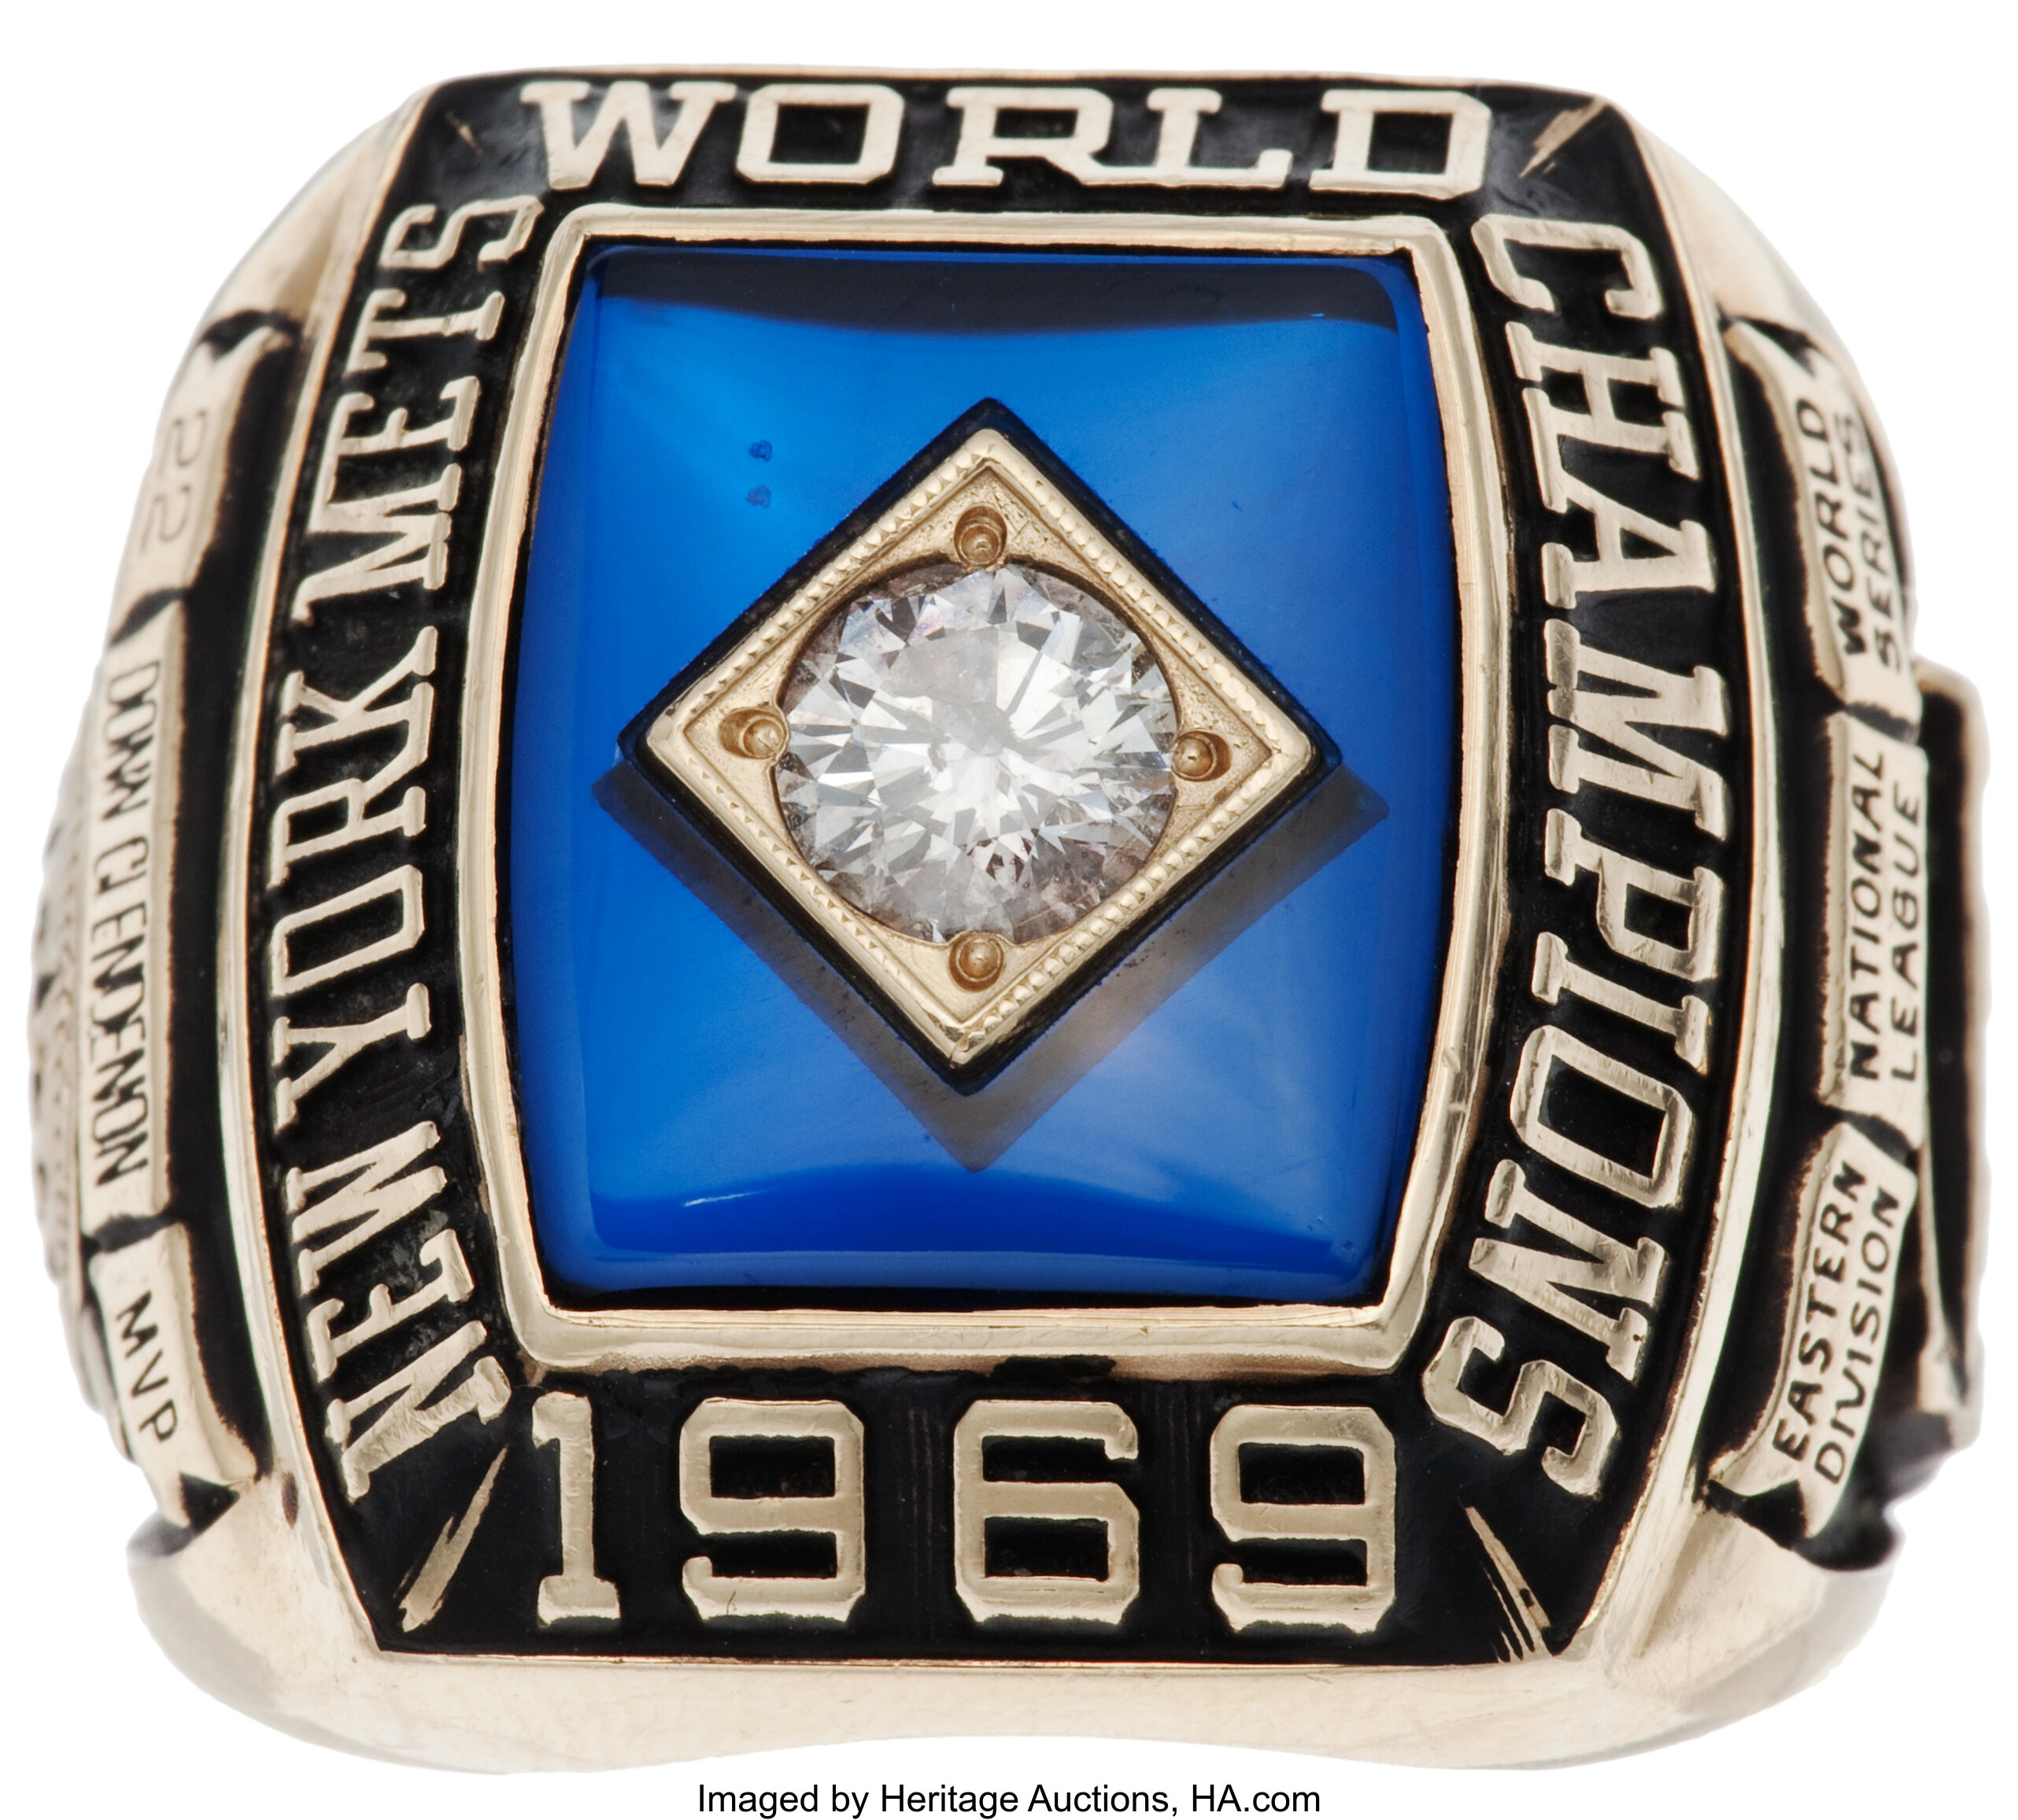 New York Mets: Color Photos of the Legendary 1969 Championship Team